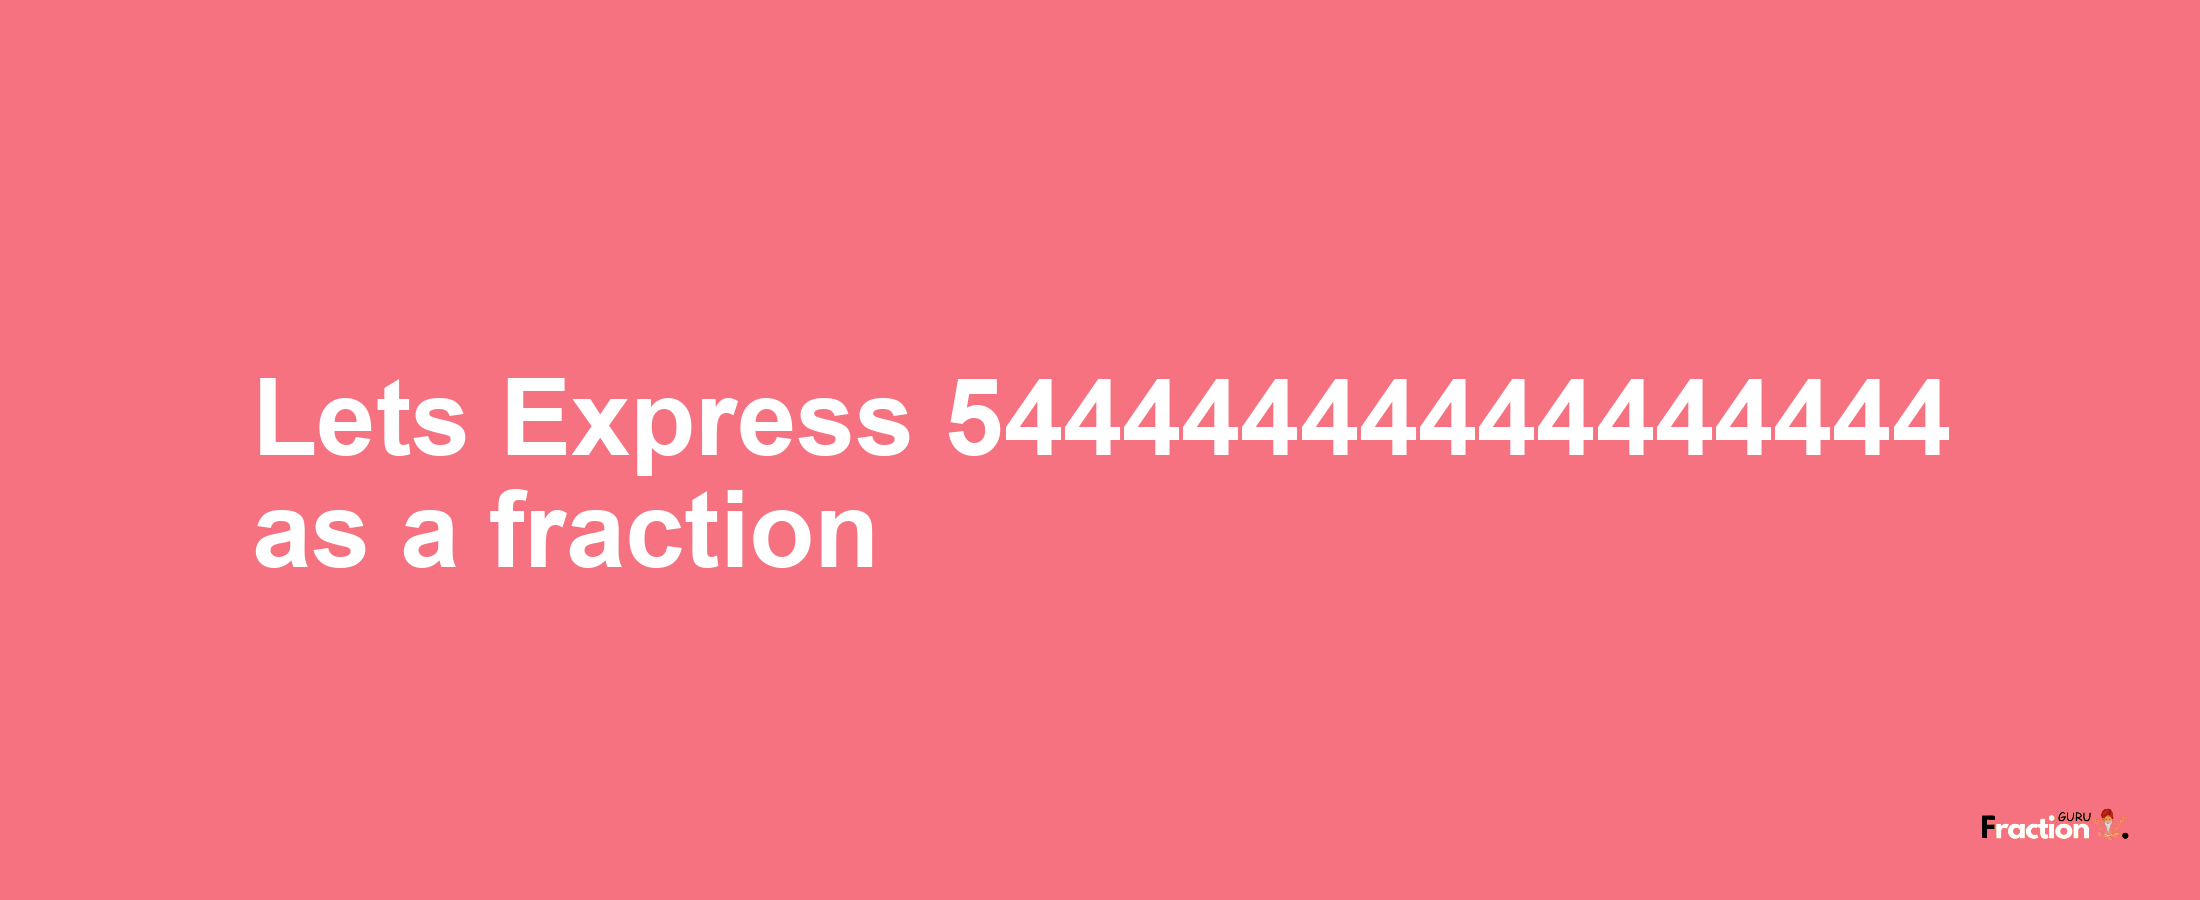 Lets Express 54444444444444444 as afraction